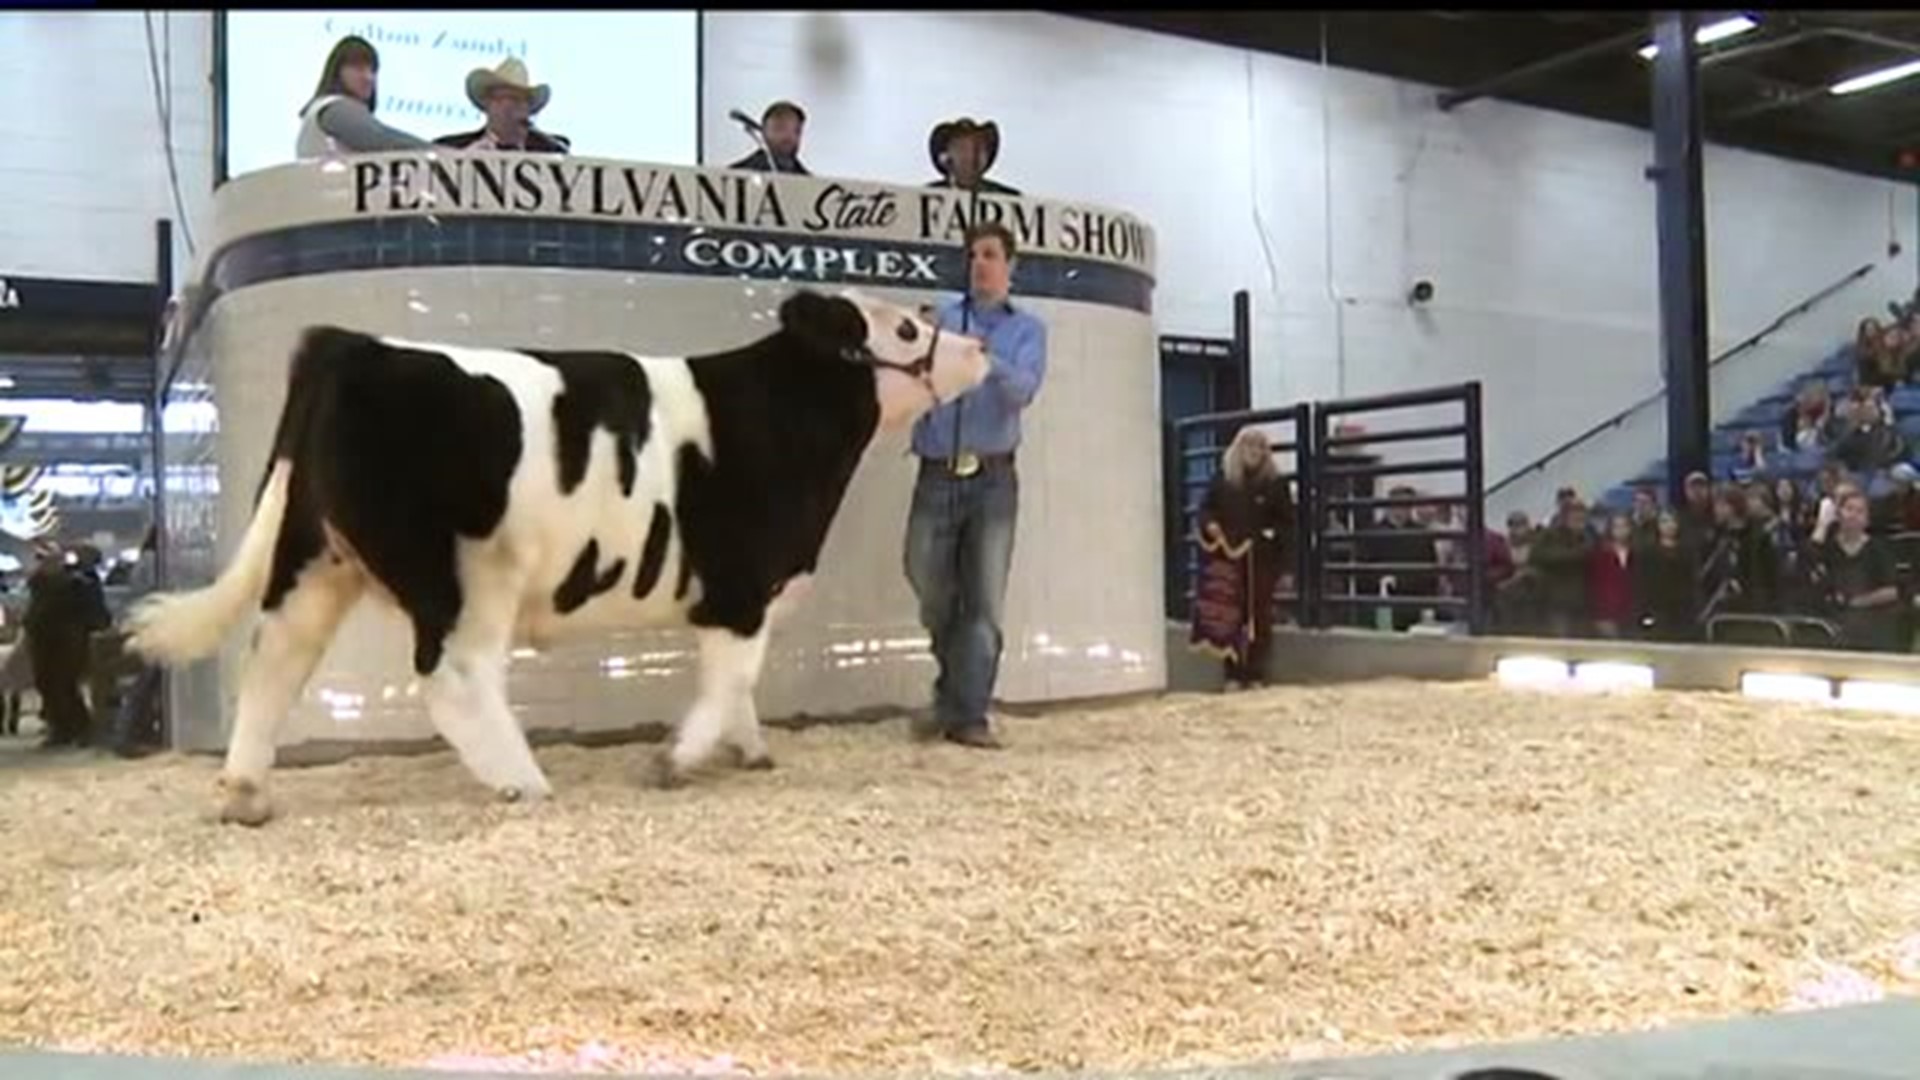 Big Winner, Bigger Heart: Farm Show auction champ donating to family with cancer-stricken daughter